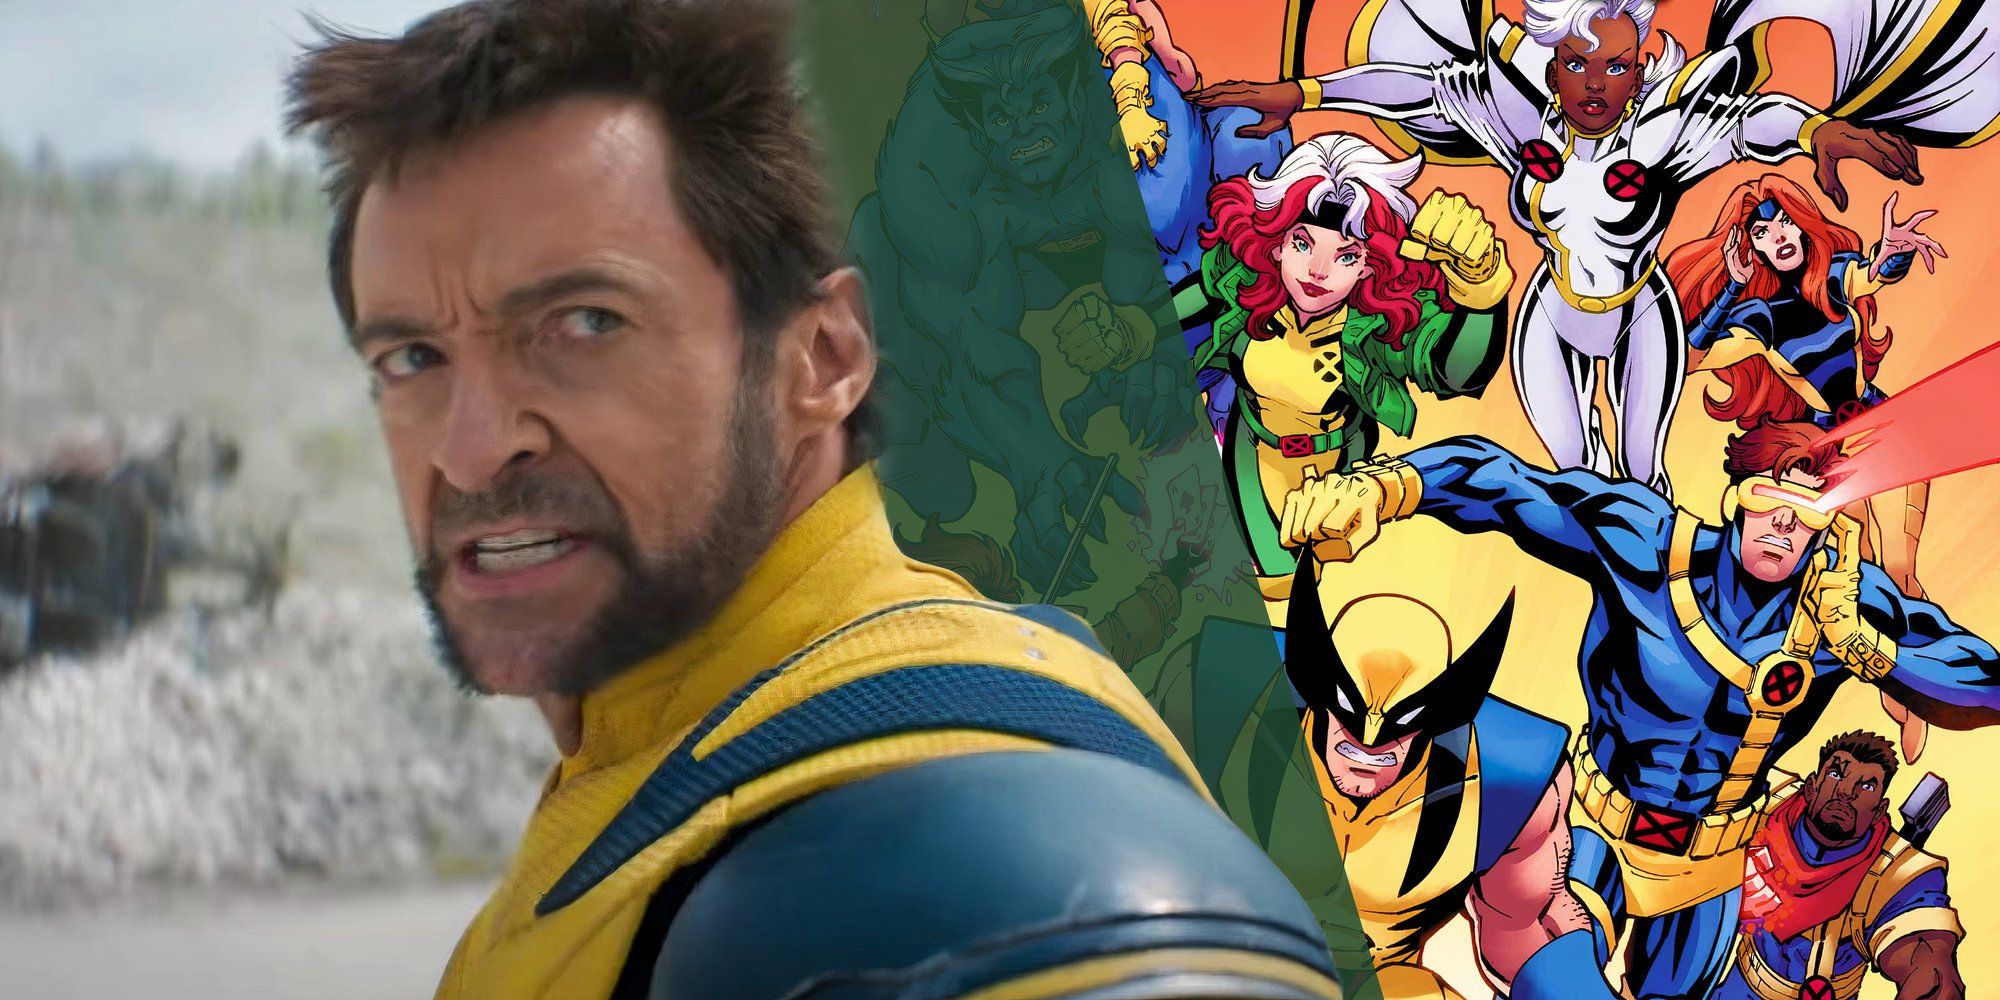 Hugh Jackman snarling as Logan in Deadpool & Wolverine (2024) next to the poster for X-Men '97 (2024)